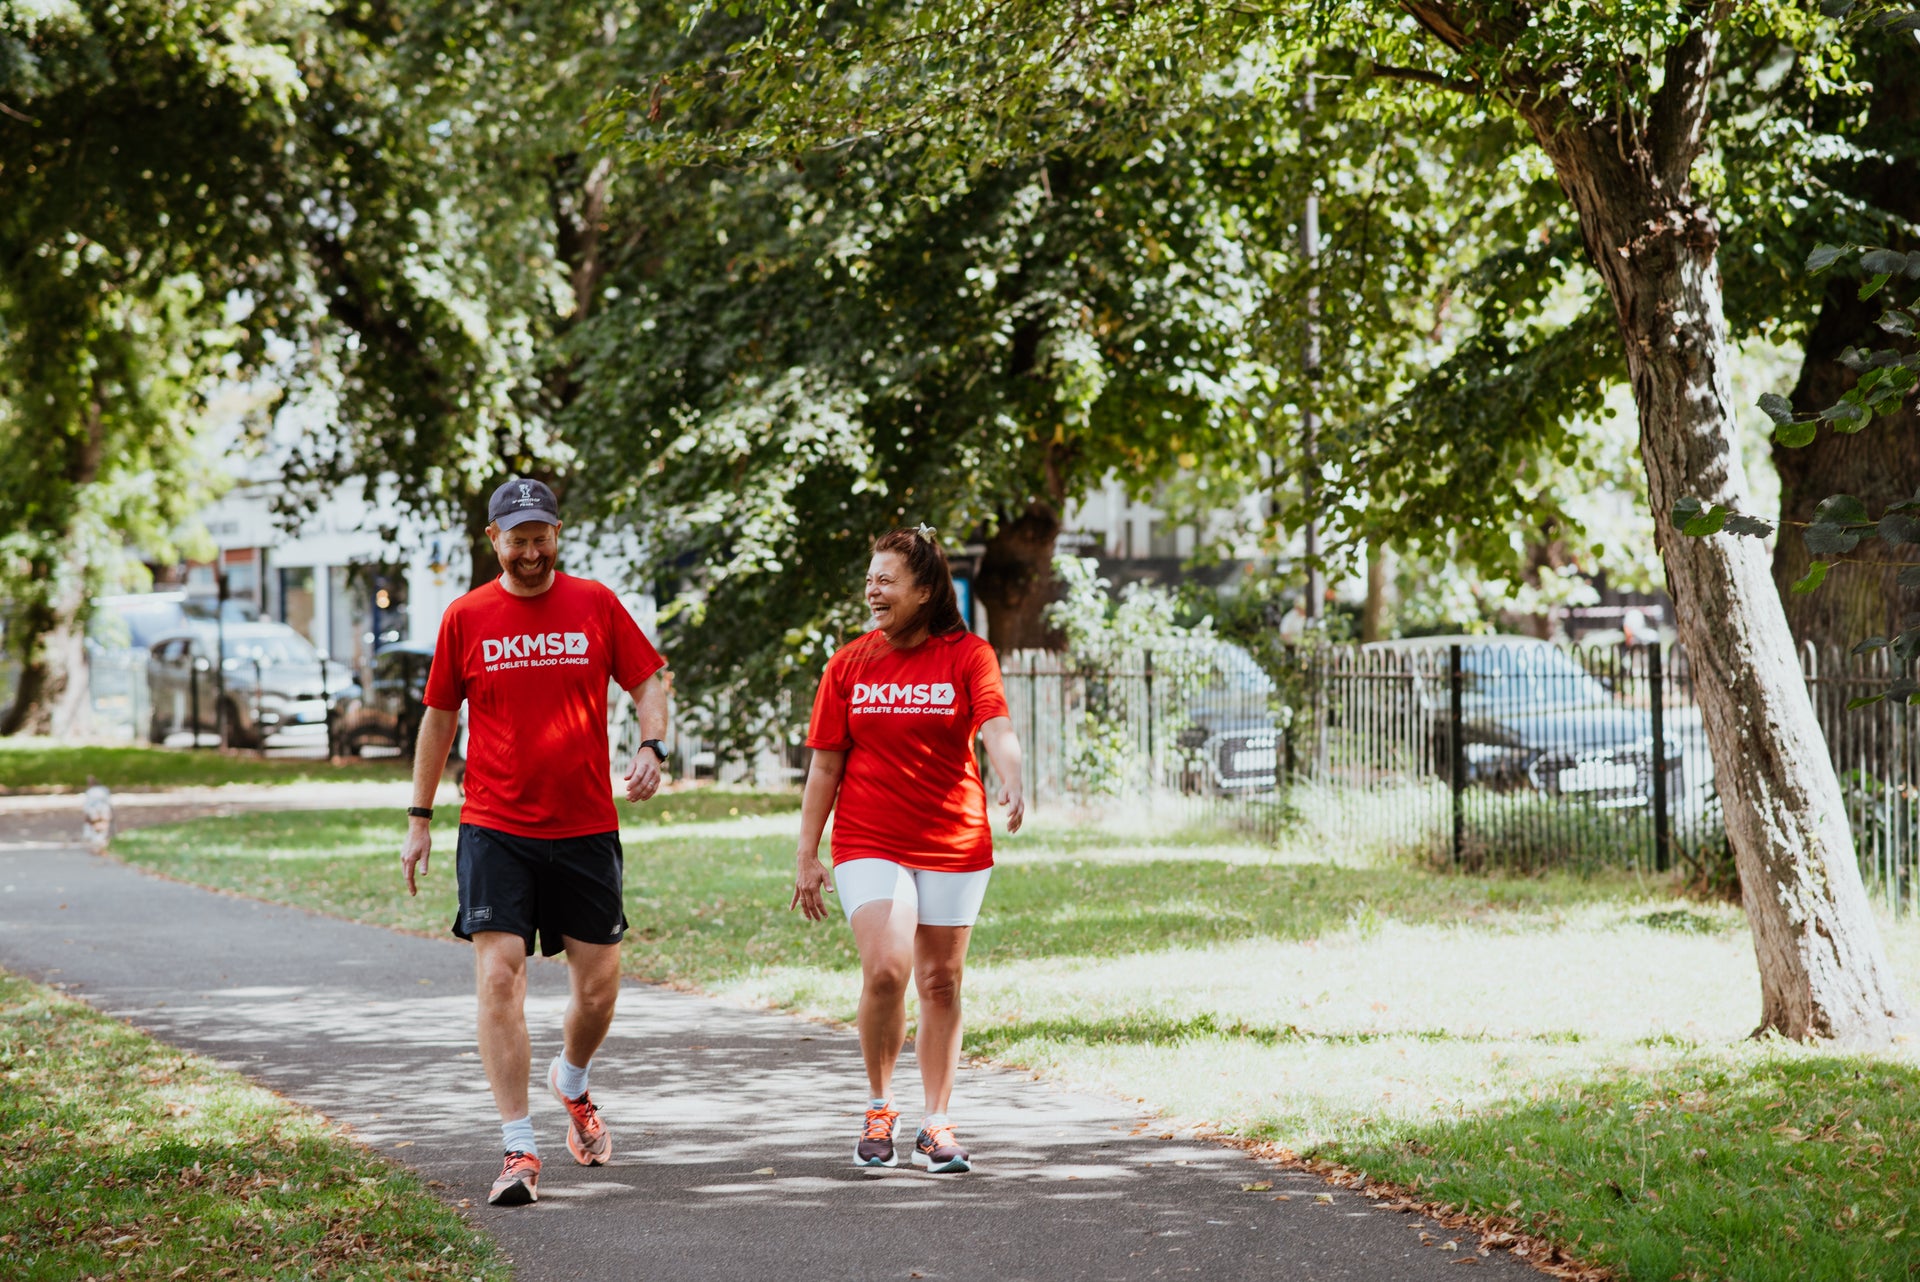 Two people in DKMS t-shirts walking in the park